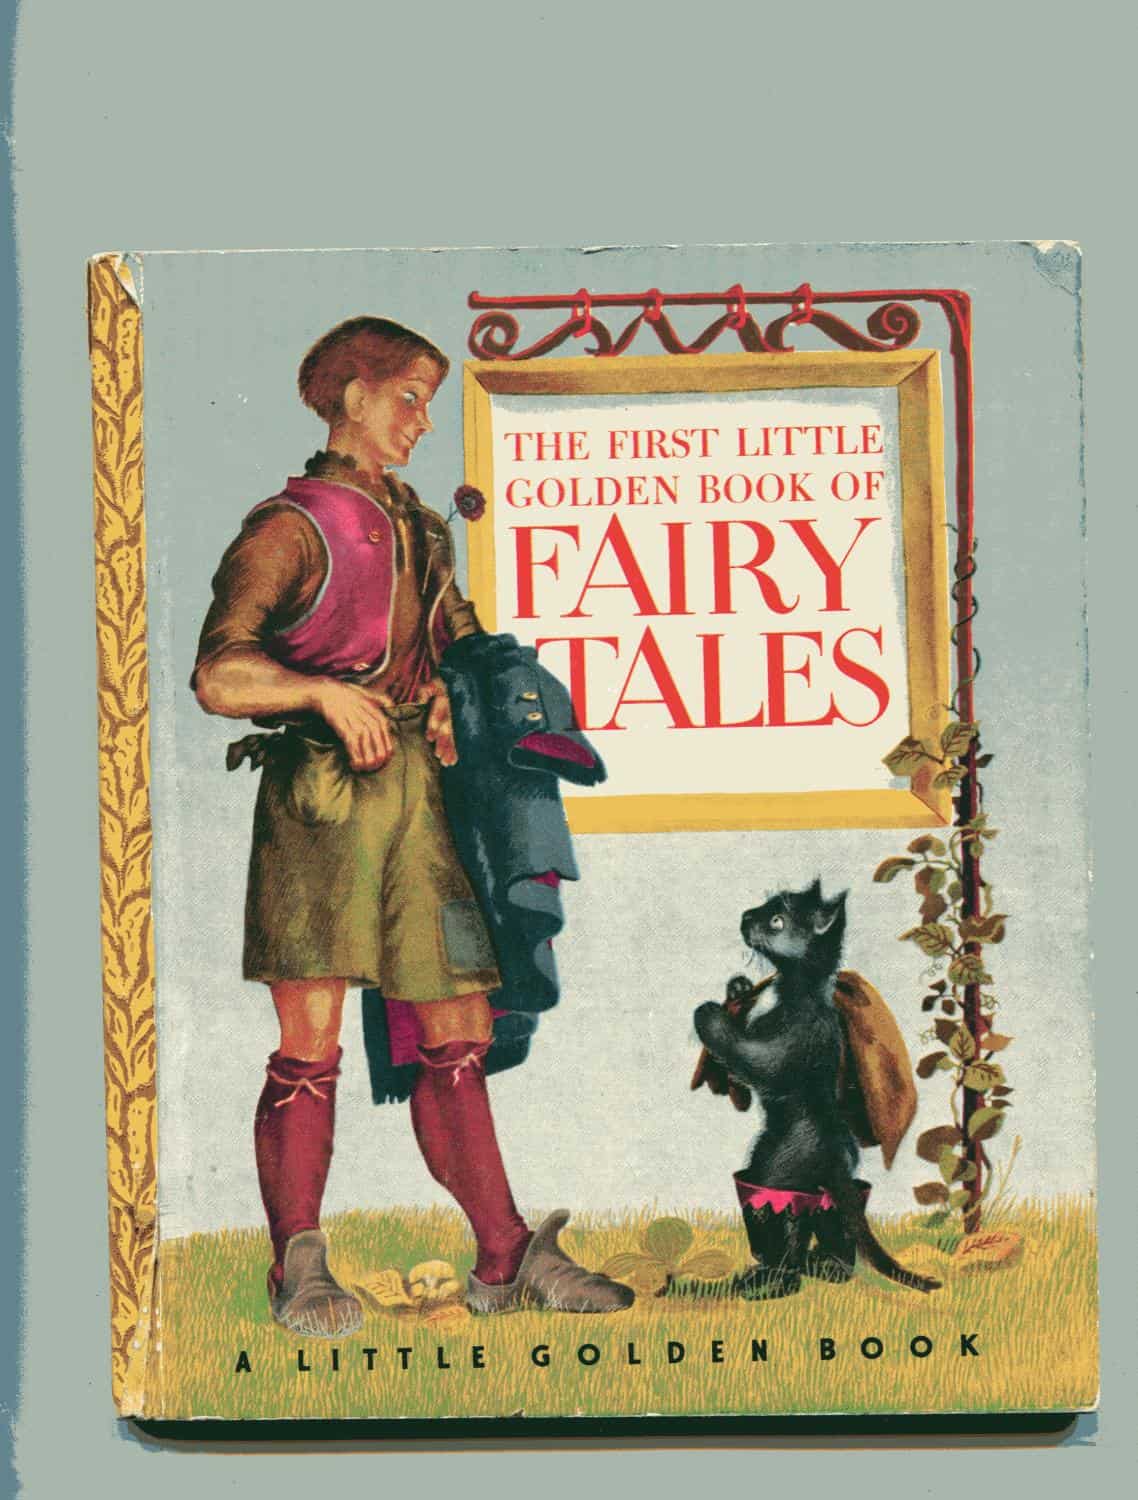 The First Little Golden Book of Fairy Tales